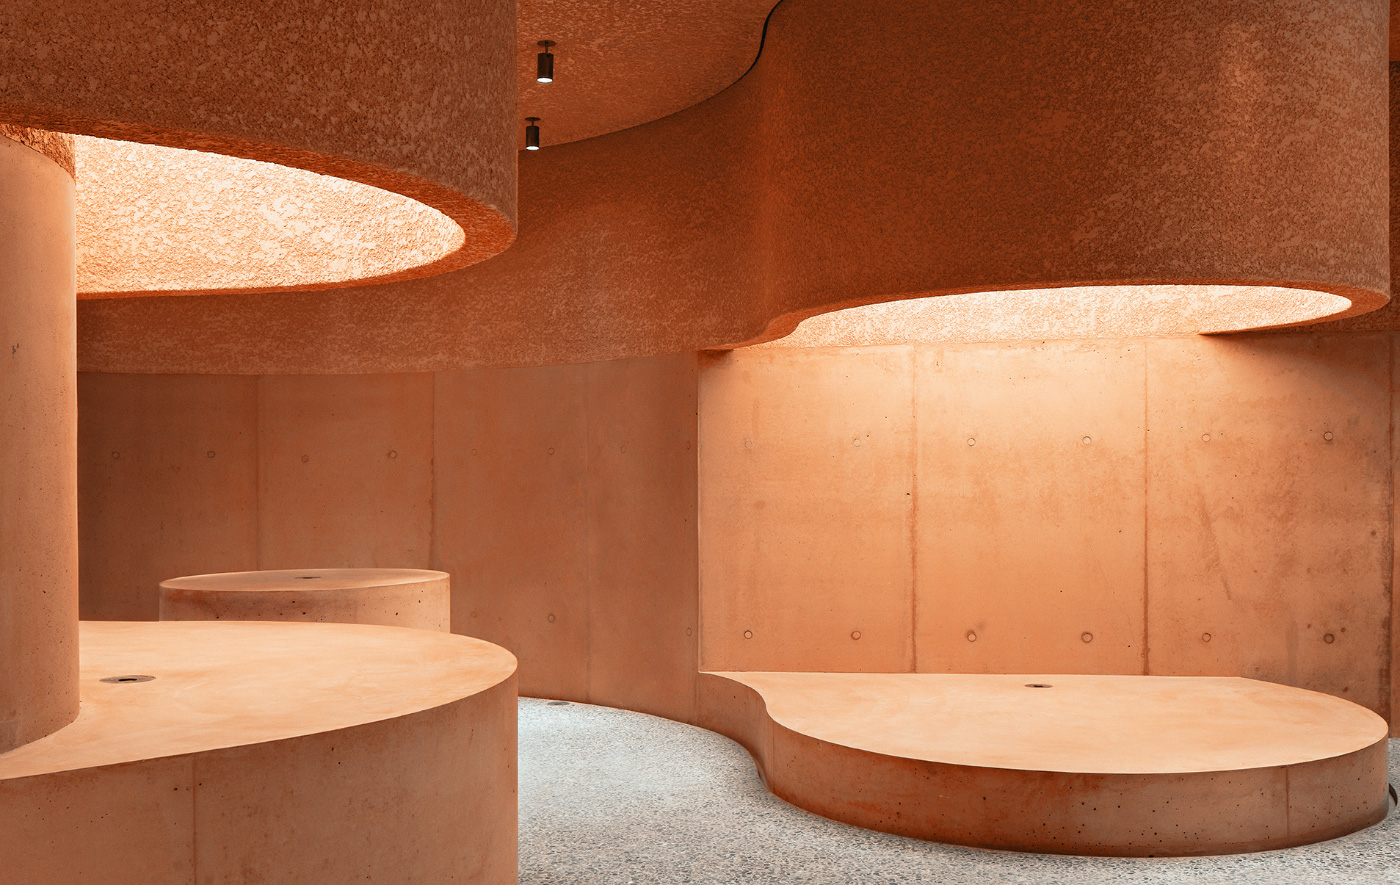 Interior of a pink concrete retail store for The Webster